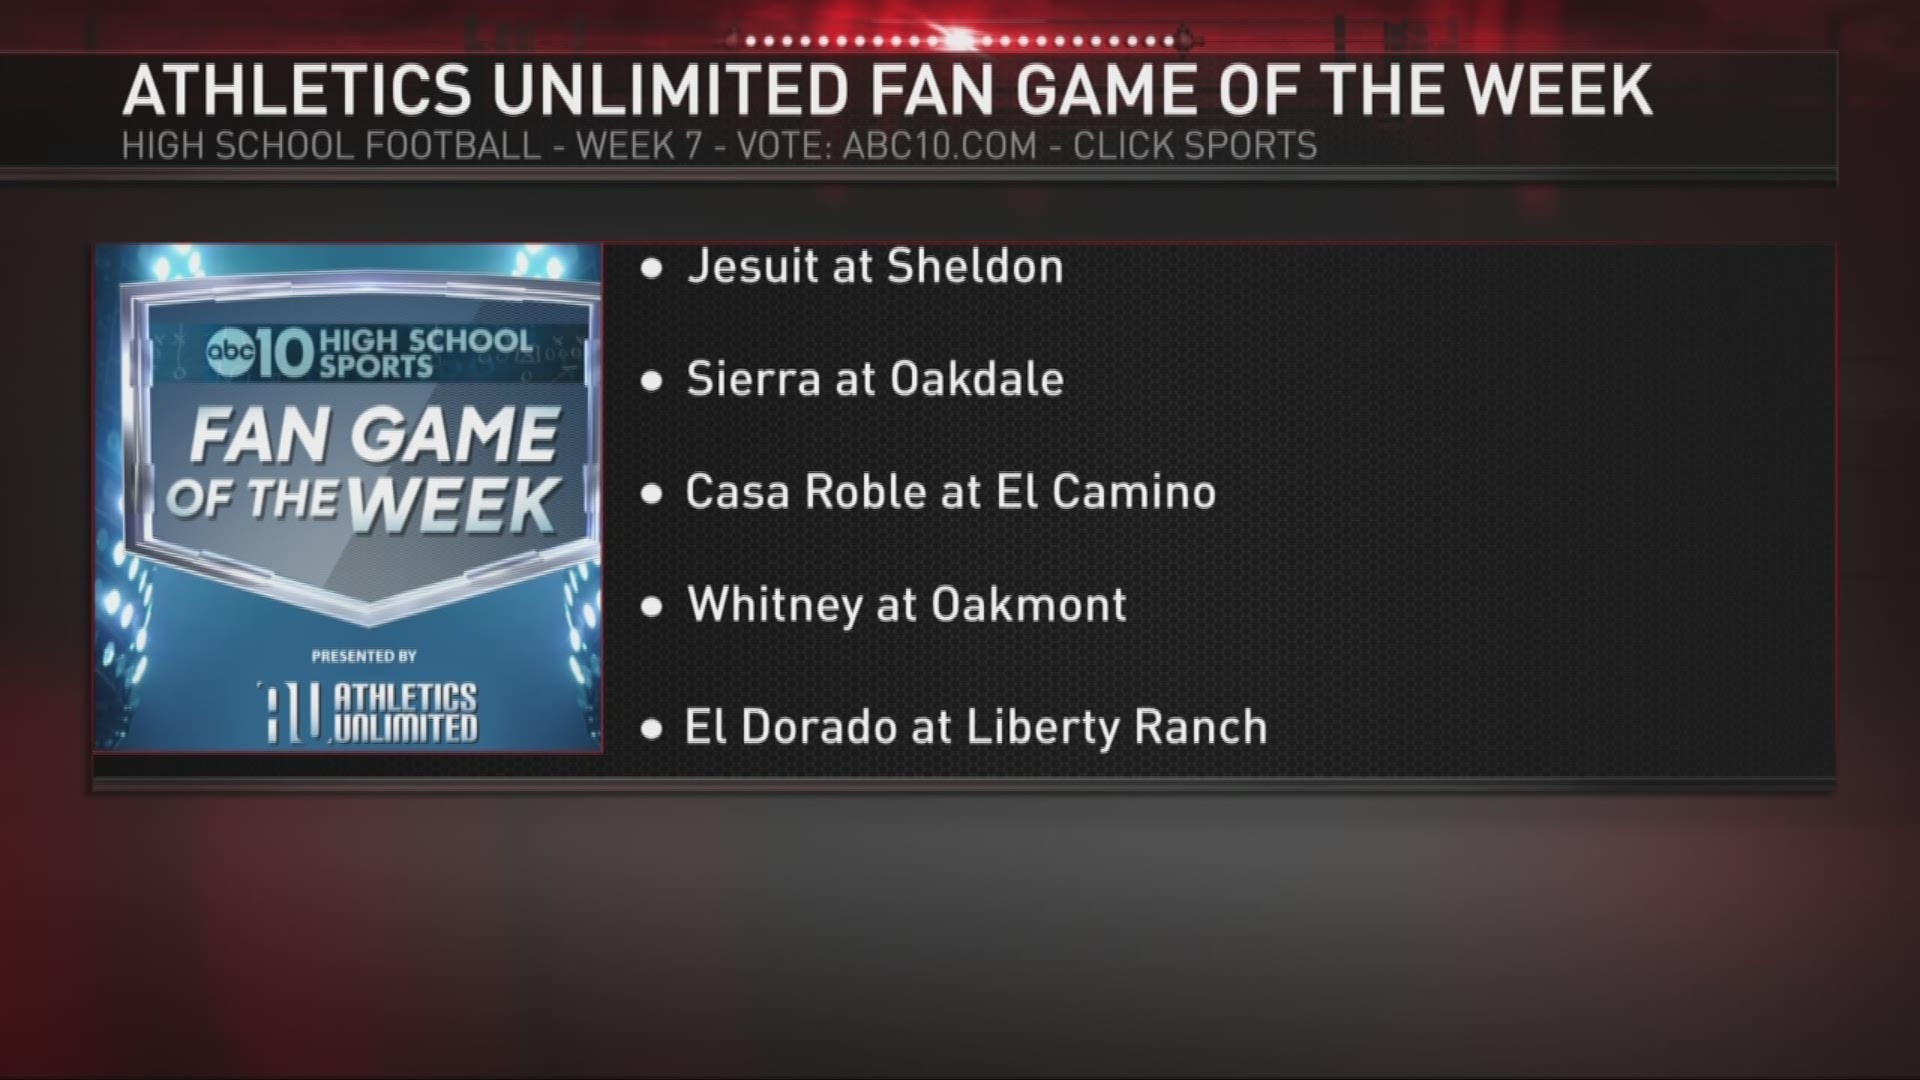 Every week, ABC10 High School Sports asks YOU to vote for the Athletics Unlimited Fan Game of the Week. The winning game will get extended coverage during ABC10's Friday Night Football coverage!